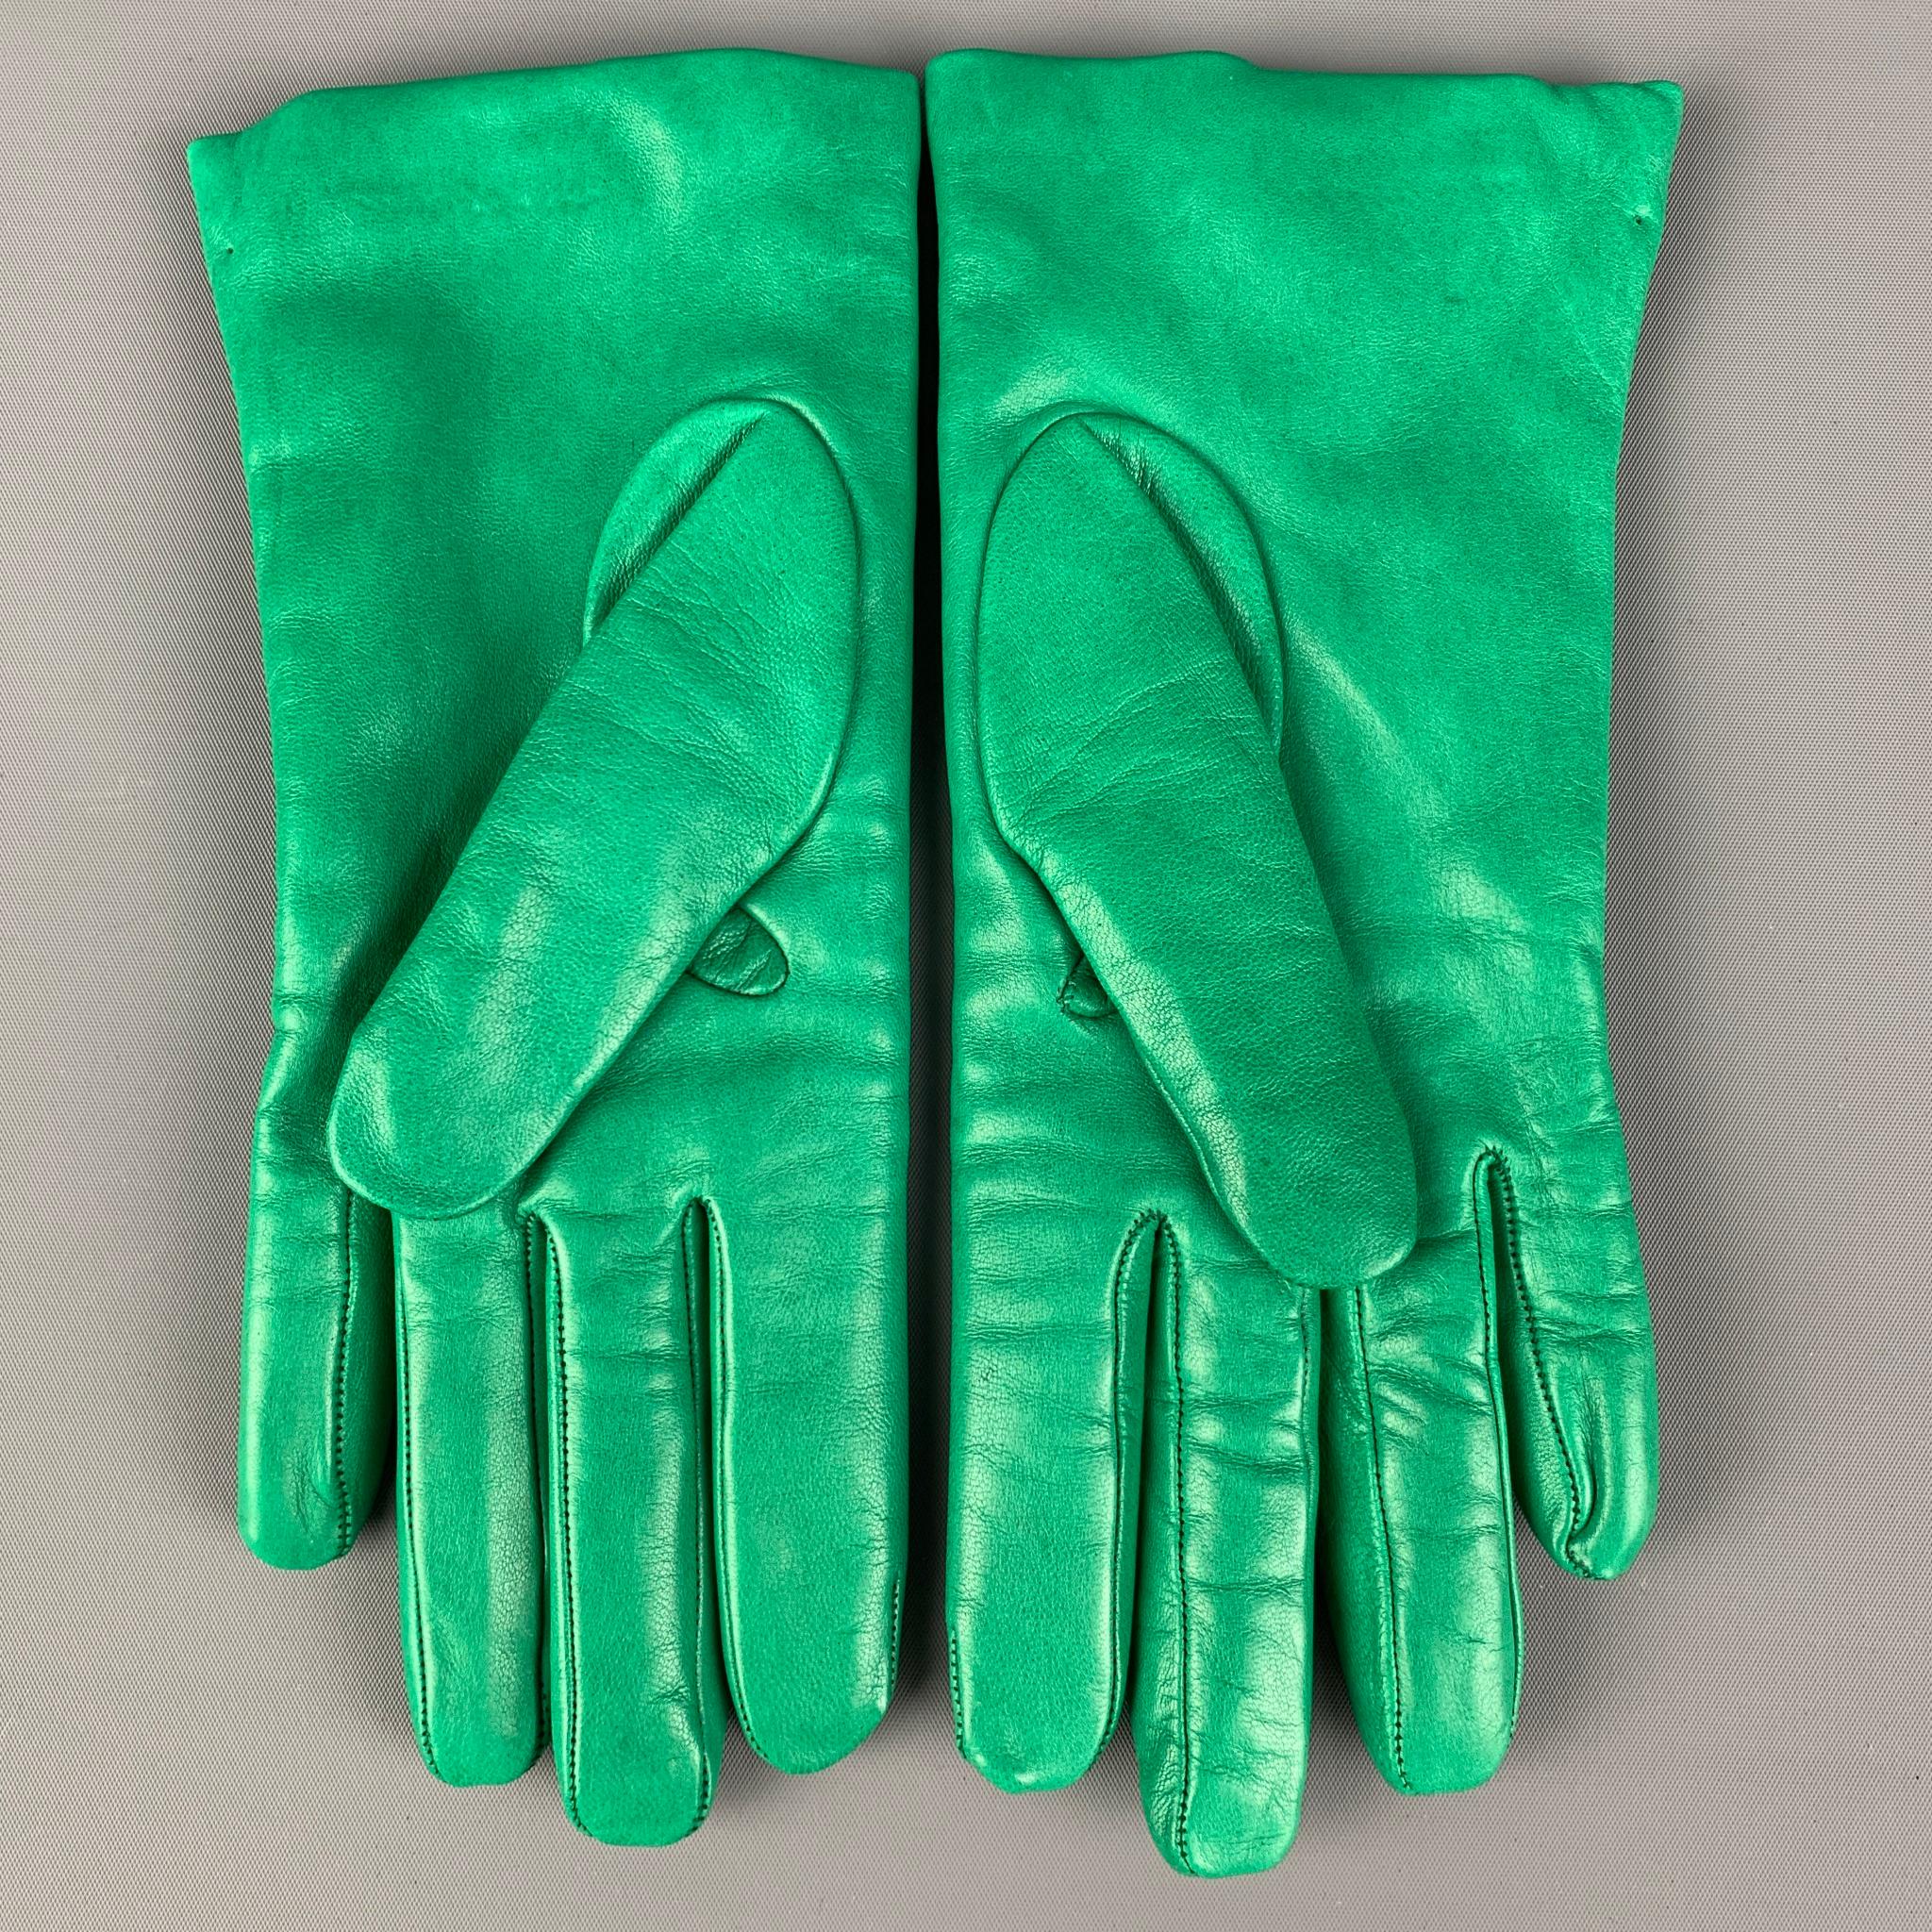 FLORENS gloves comes in a green leather with a cashmere lining. Made in Italy. 

Very Good Pre-Owned Condition.

Marked: 7

Measurements:

Width: 4 in.
Length: 9 in. 